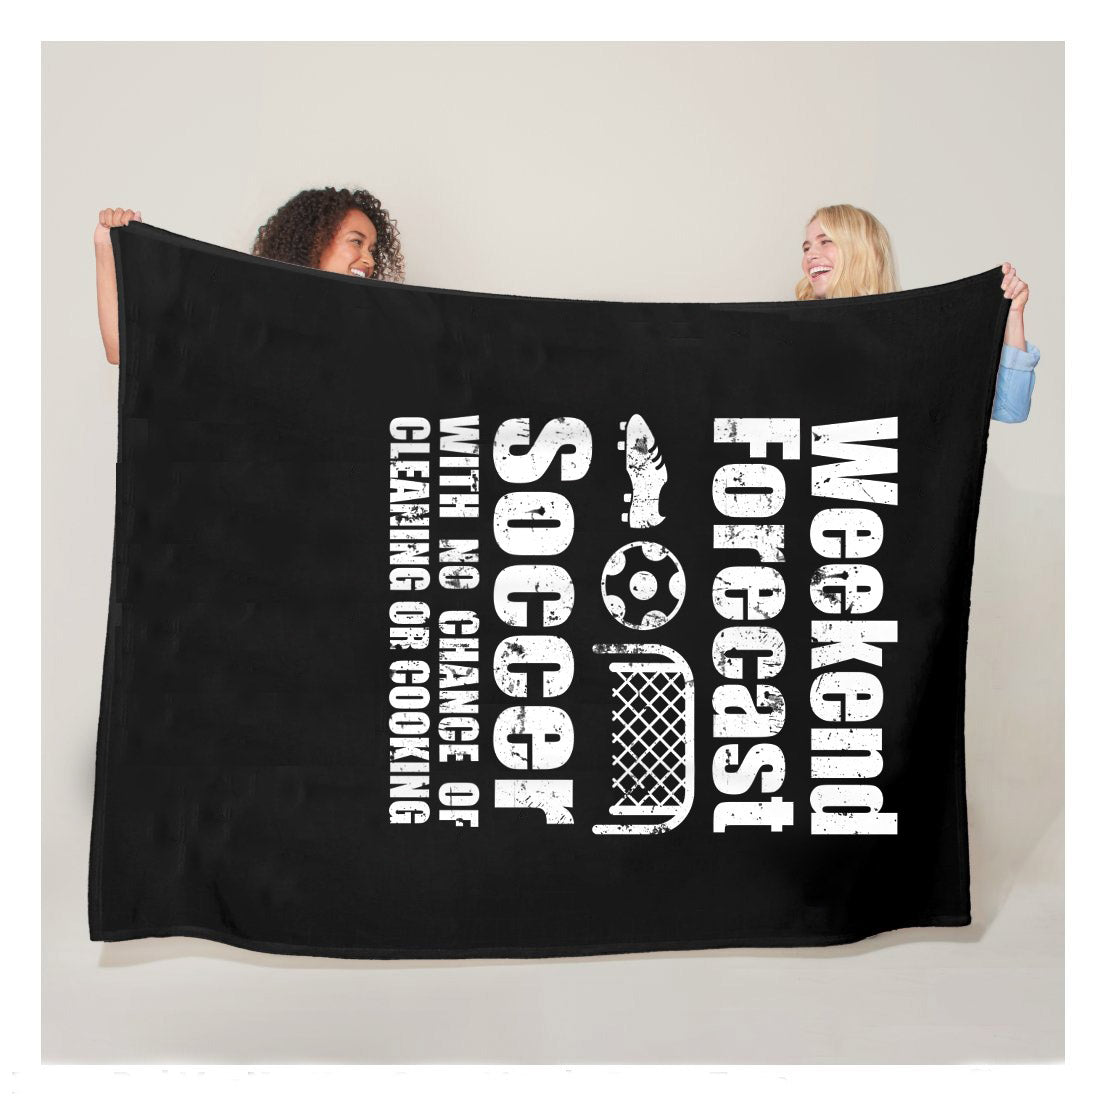 Funny Soccer Blanket Weekend Forecast Soccer Sherpa Blanket,  Soccer Outdoor Blankets, Soccer Gifts For Coach And Soccer Players, Birthday Gift For Soccer Player